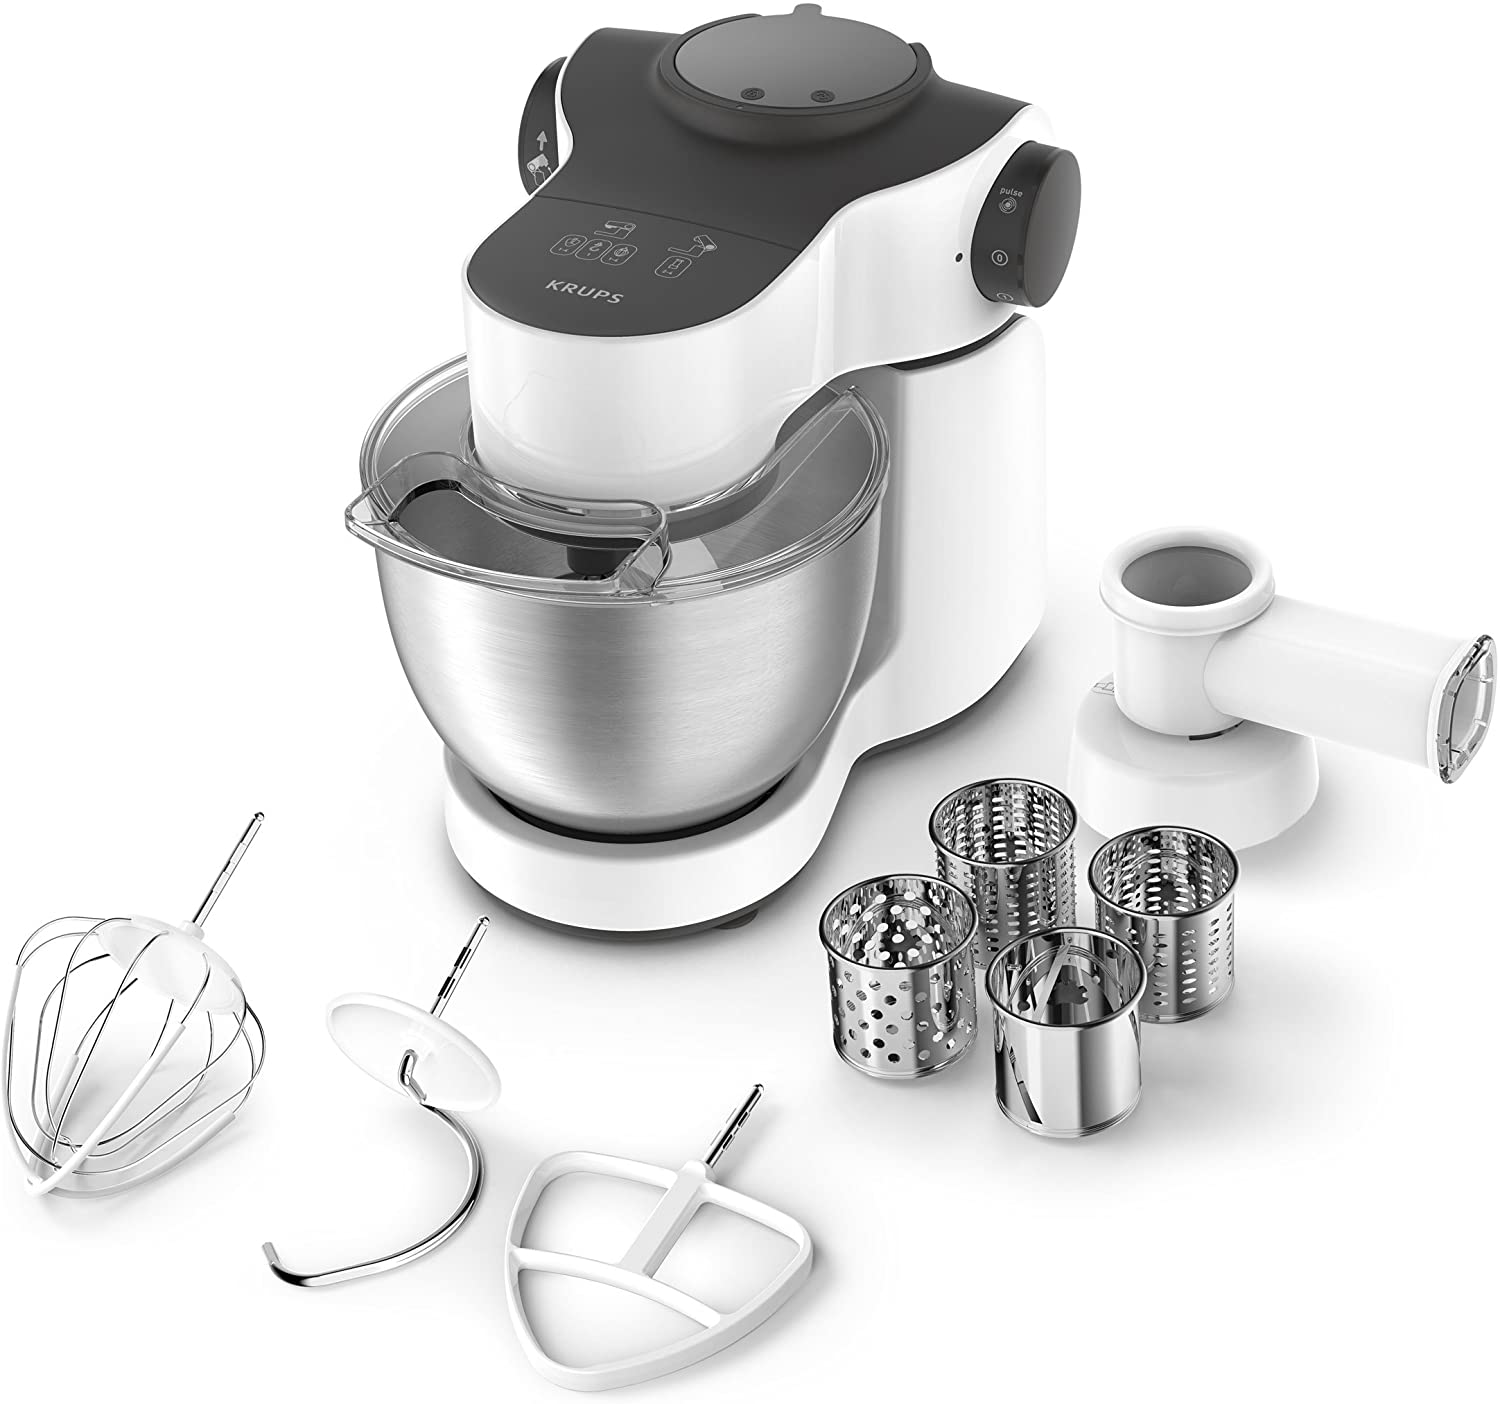 Krups Master Perfect KA2521 Food Processor 4 L 700 W with Carving Mechanism Stainless Steel / White